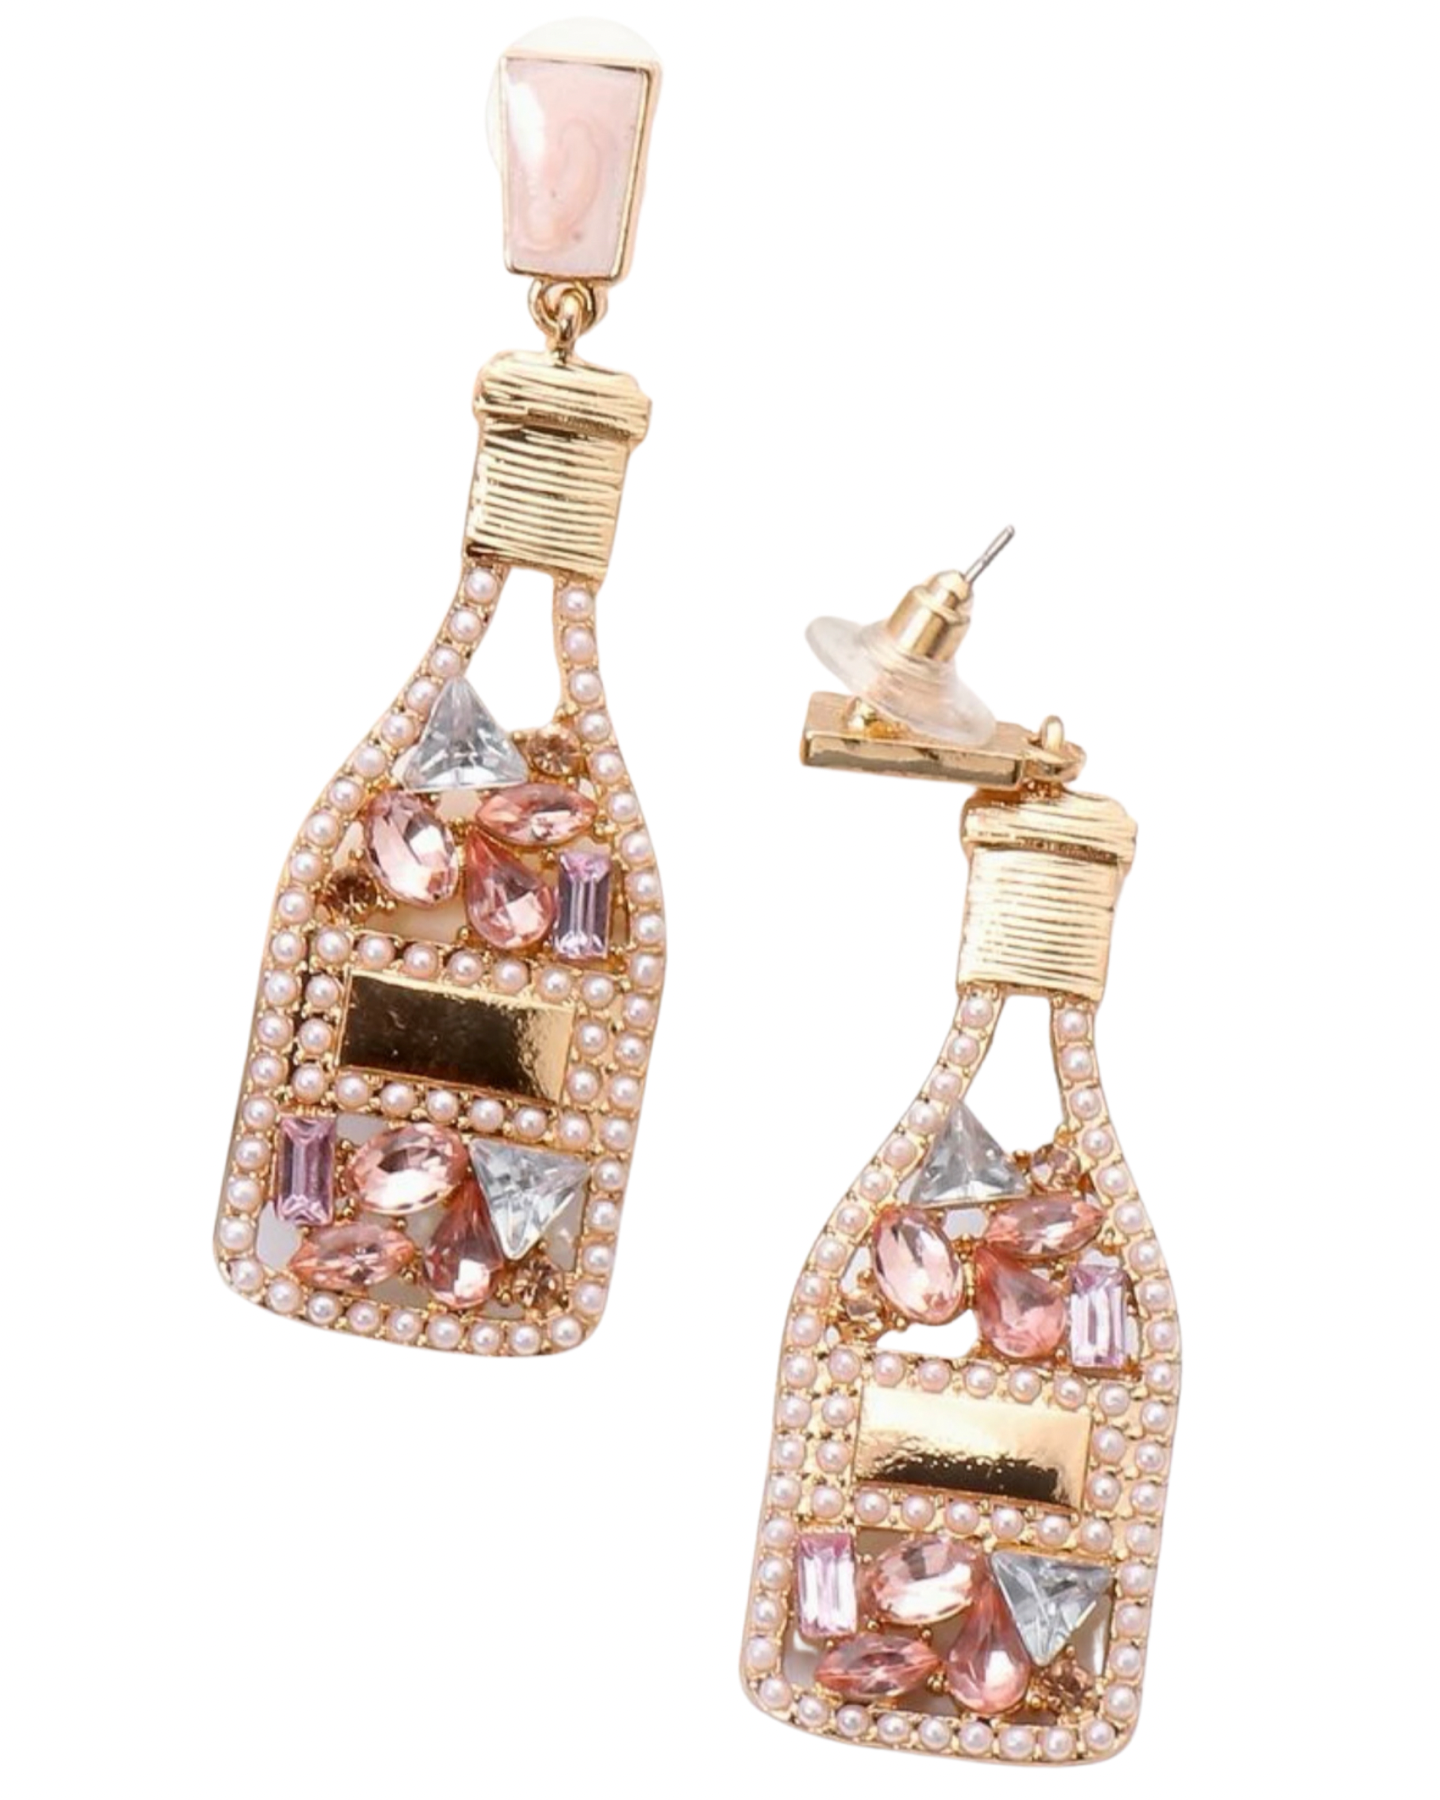 Champagne Campaign Earrings